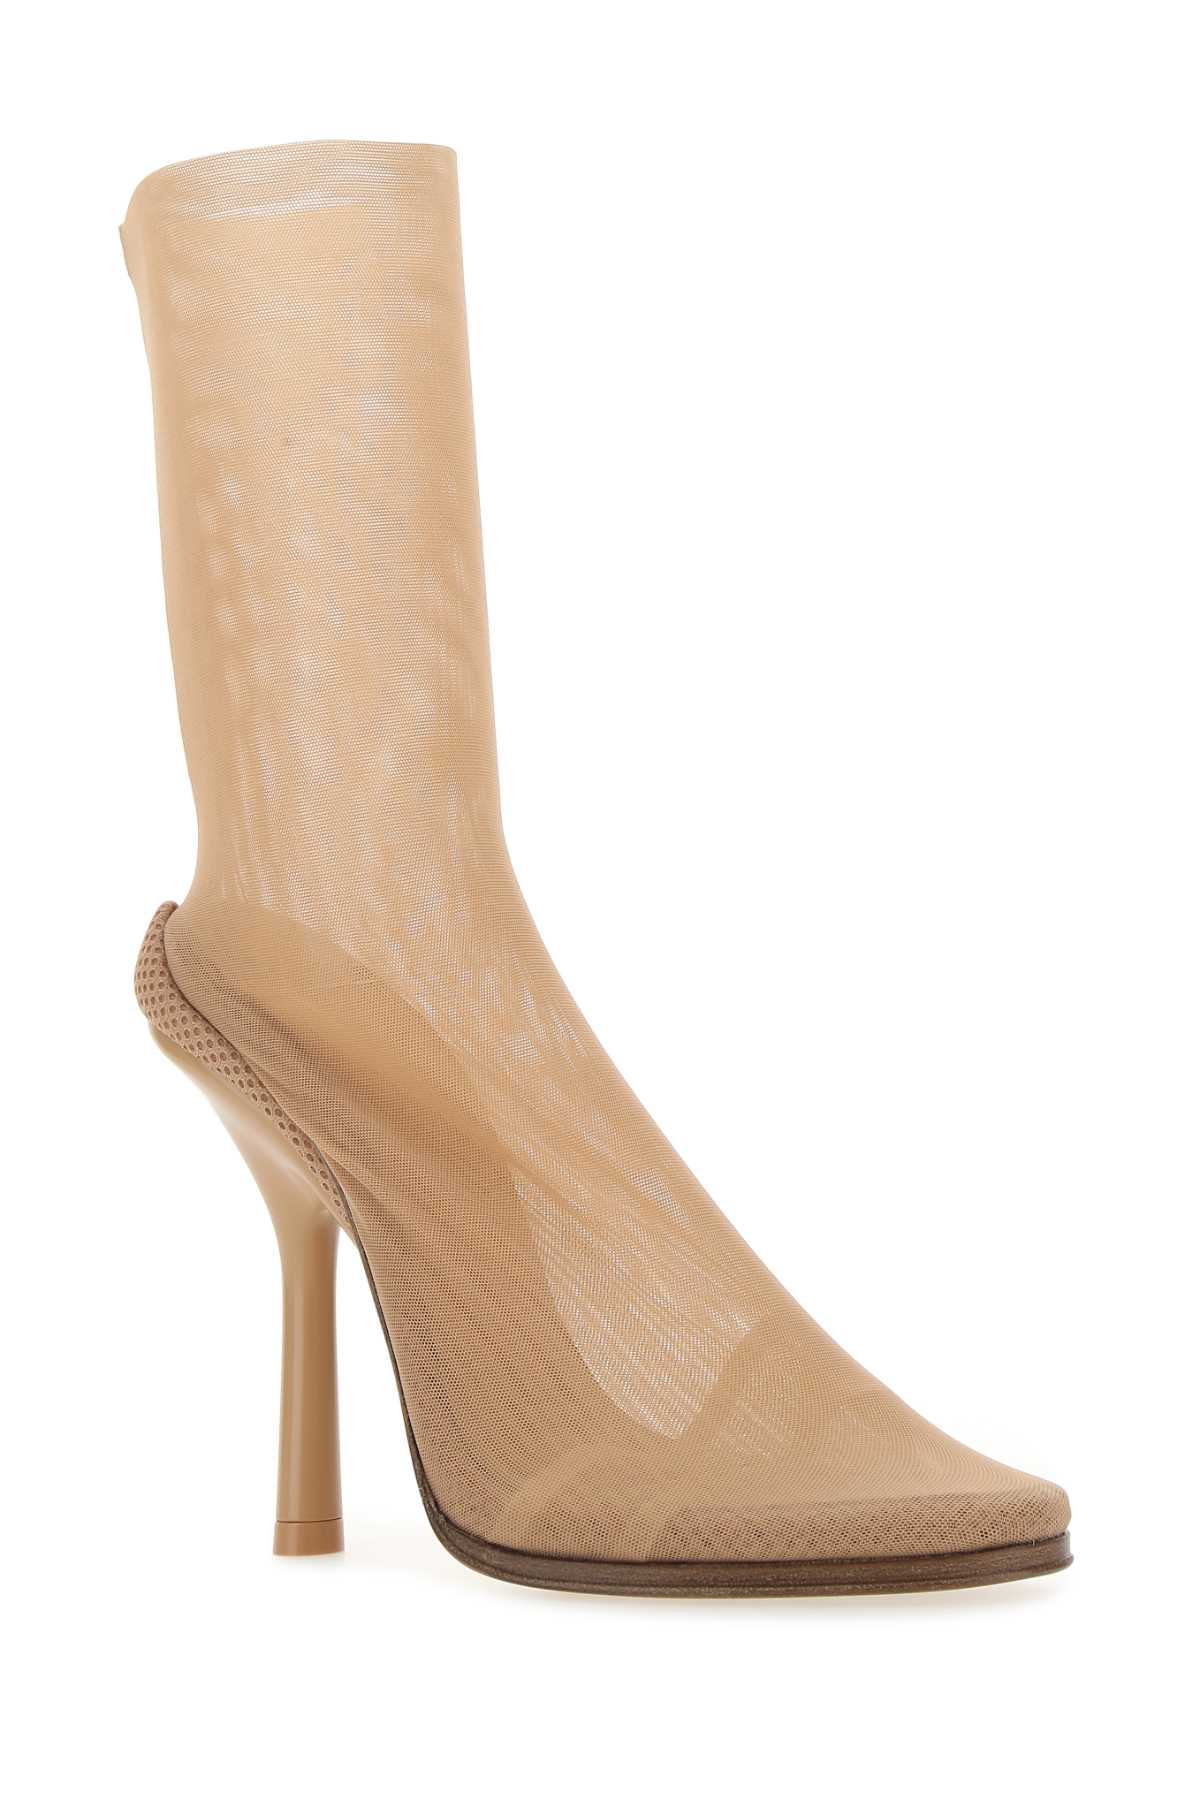 Burberry Beige Stretch Tulle Ankle Boots In A1435